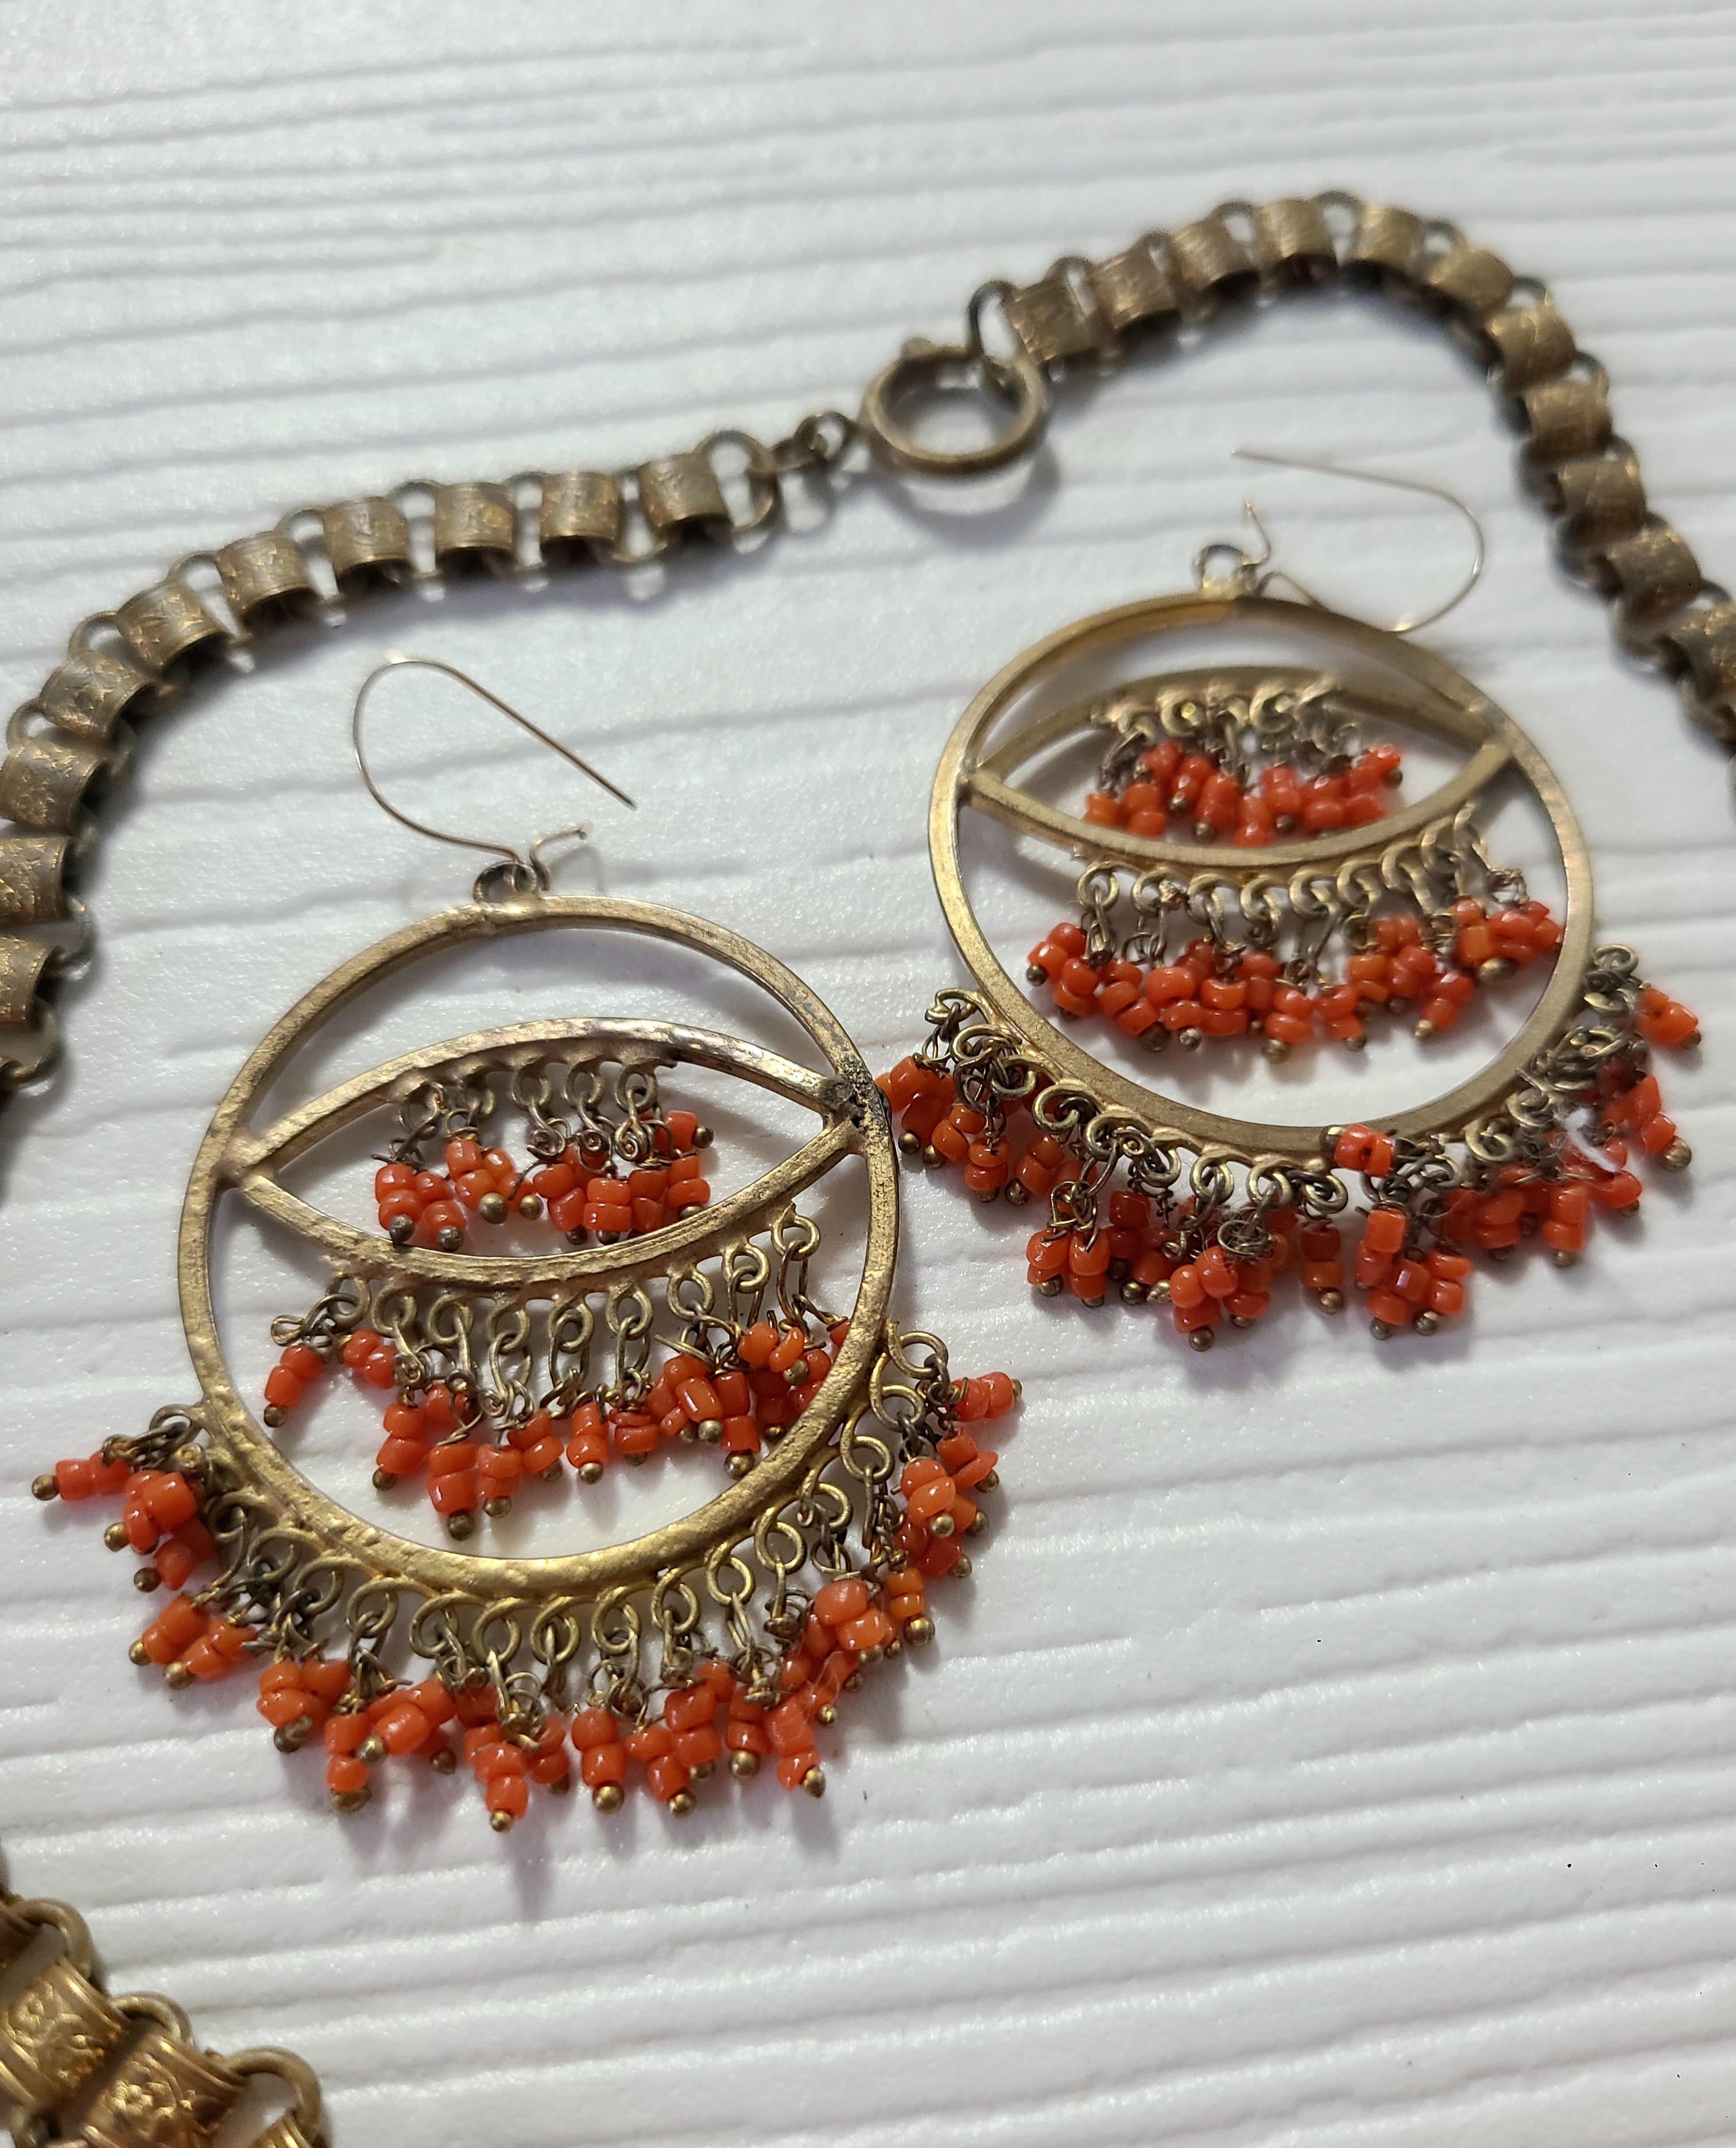 1930s Miriam Haskell Persimmon Dangling Bead Bib Necklace & Earring Set In Excellent Condition For Sale In Maywood, NJ